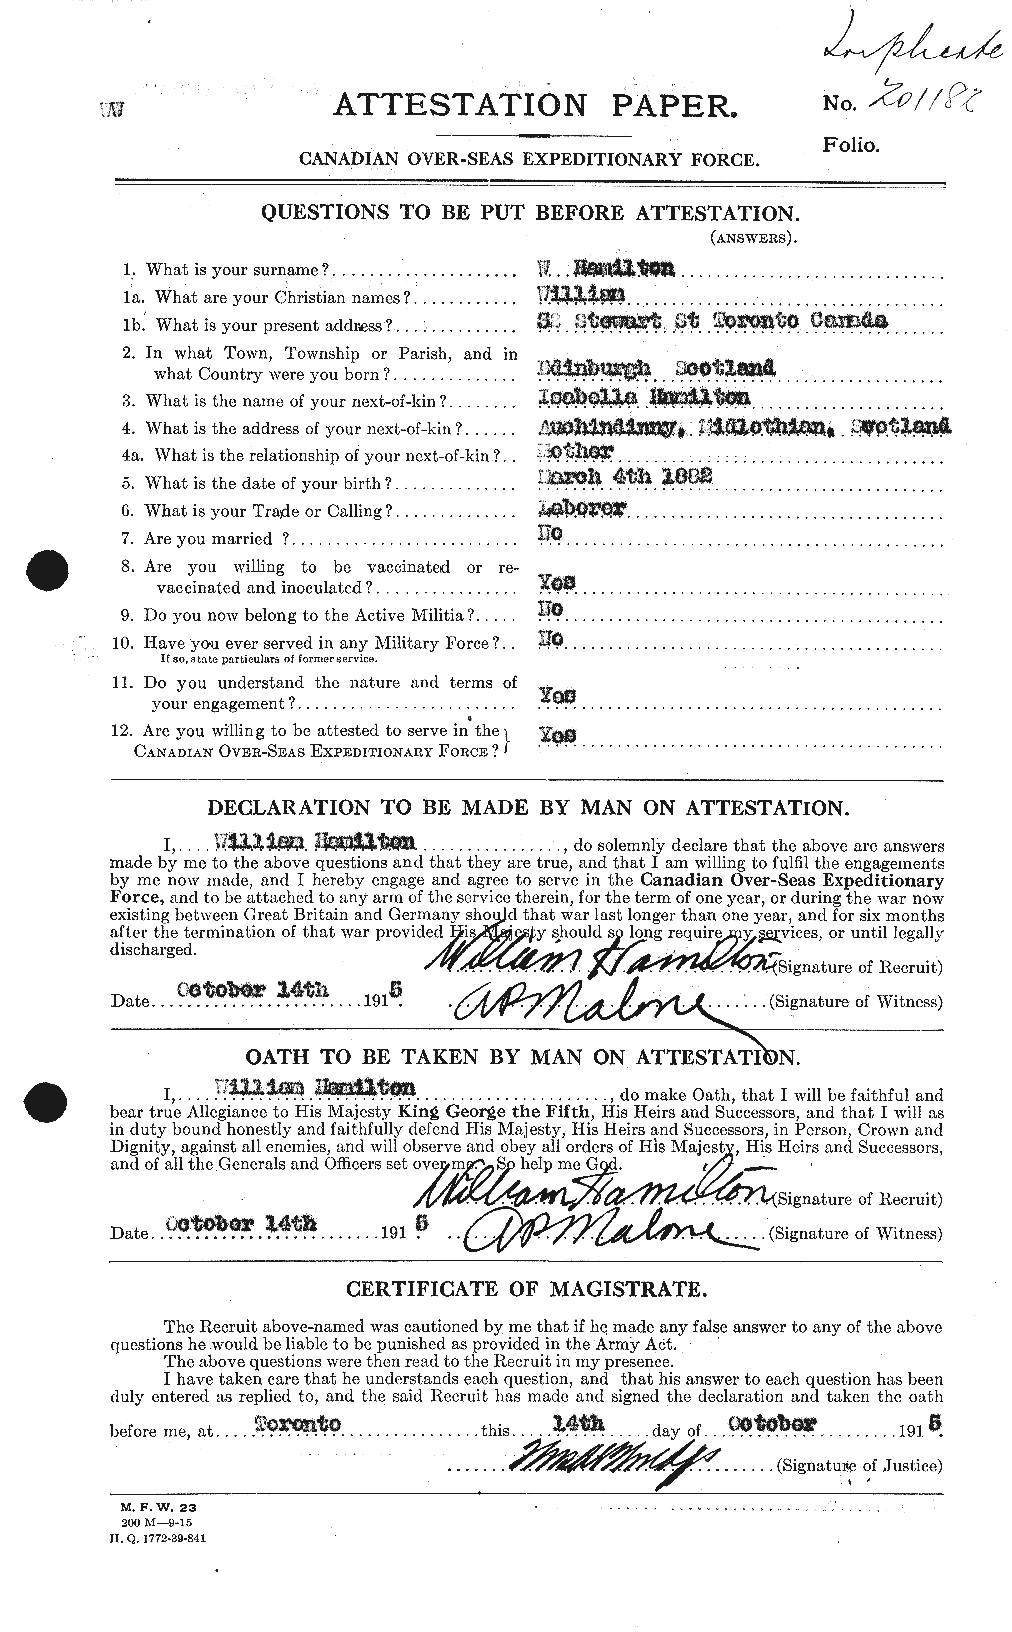 Personnel Records of the First World War - CEF 374844a